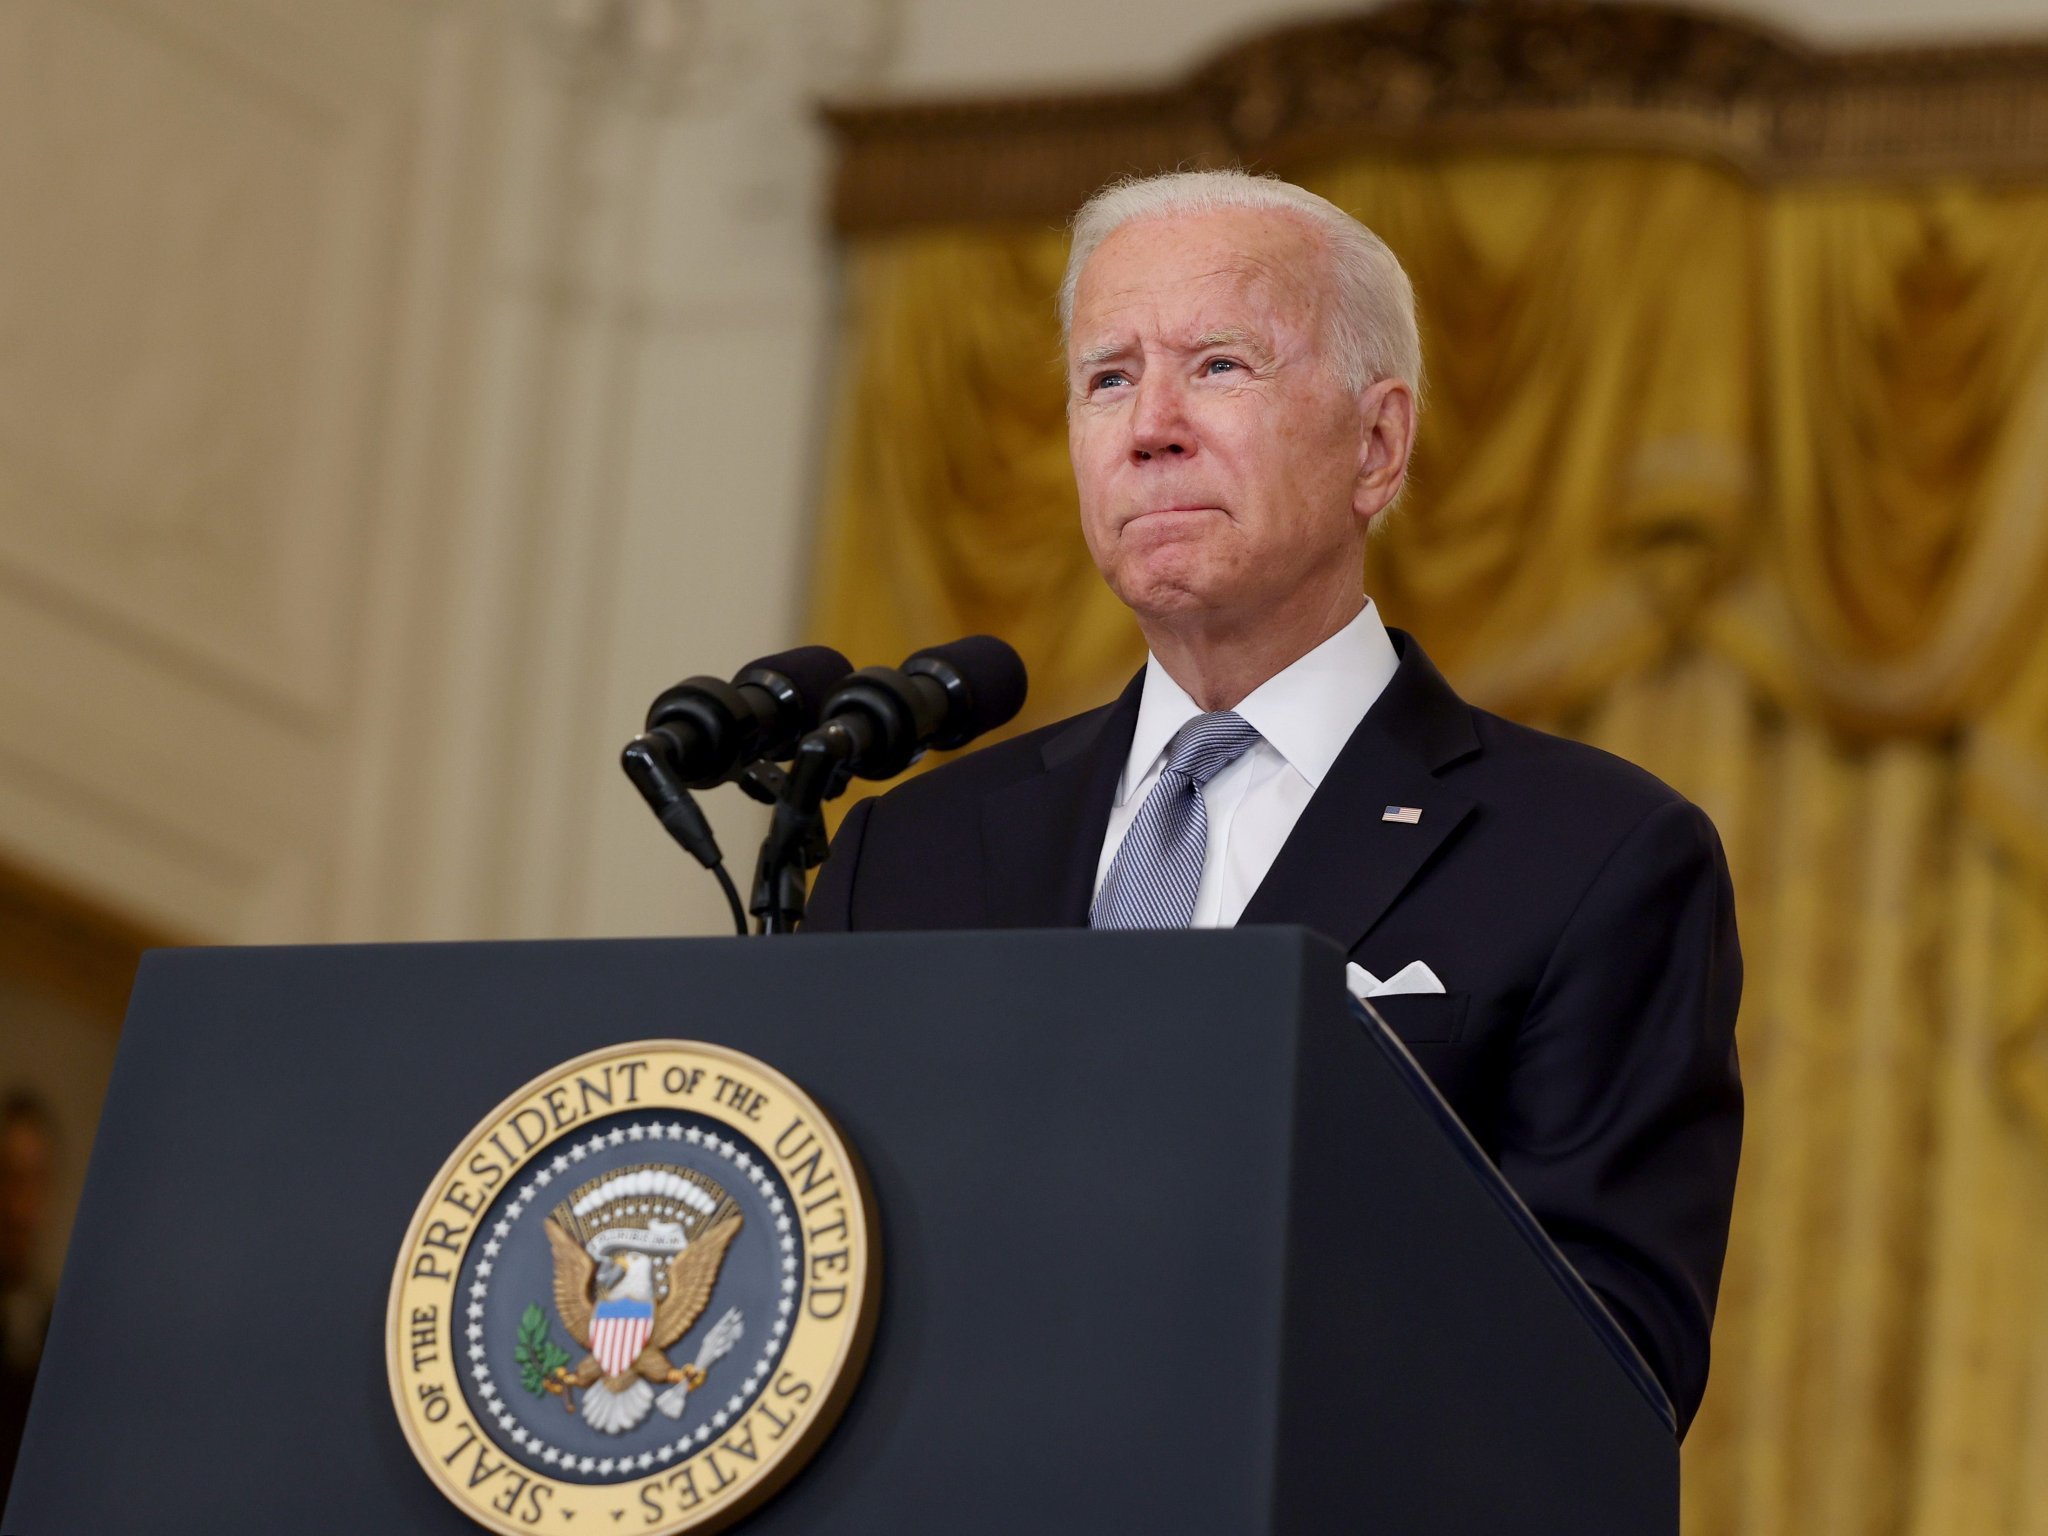 Biden says he's 'sick and tired' of the wealthiest not paying their fair share in taxes: 'It's time for it to change'